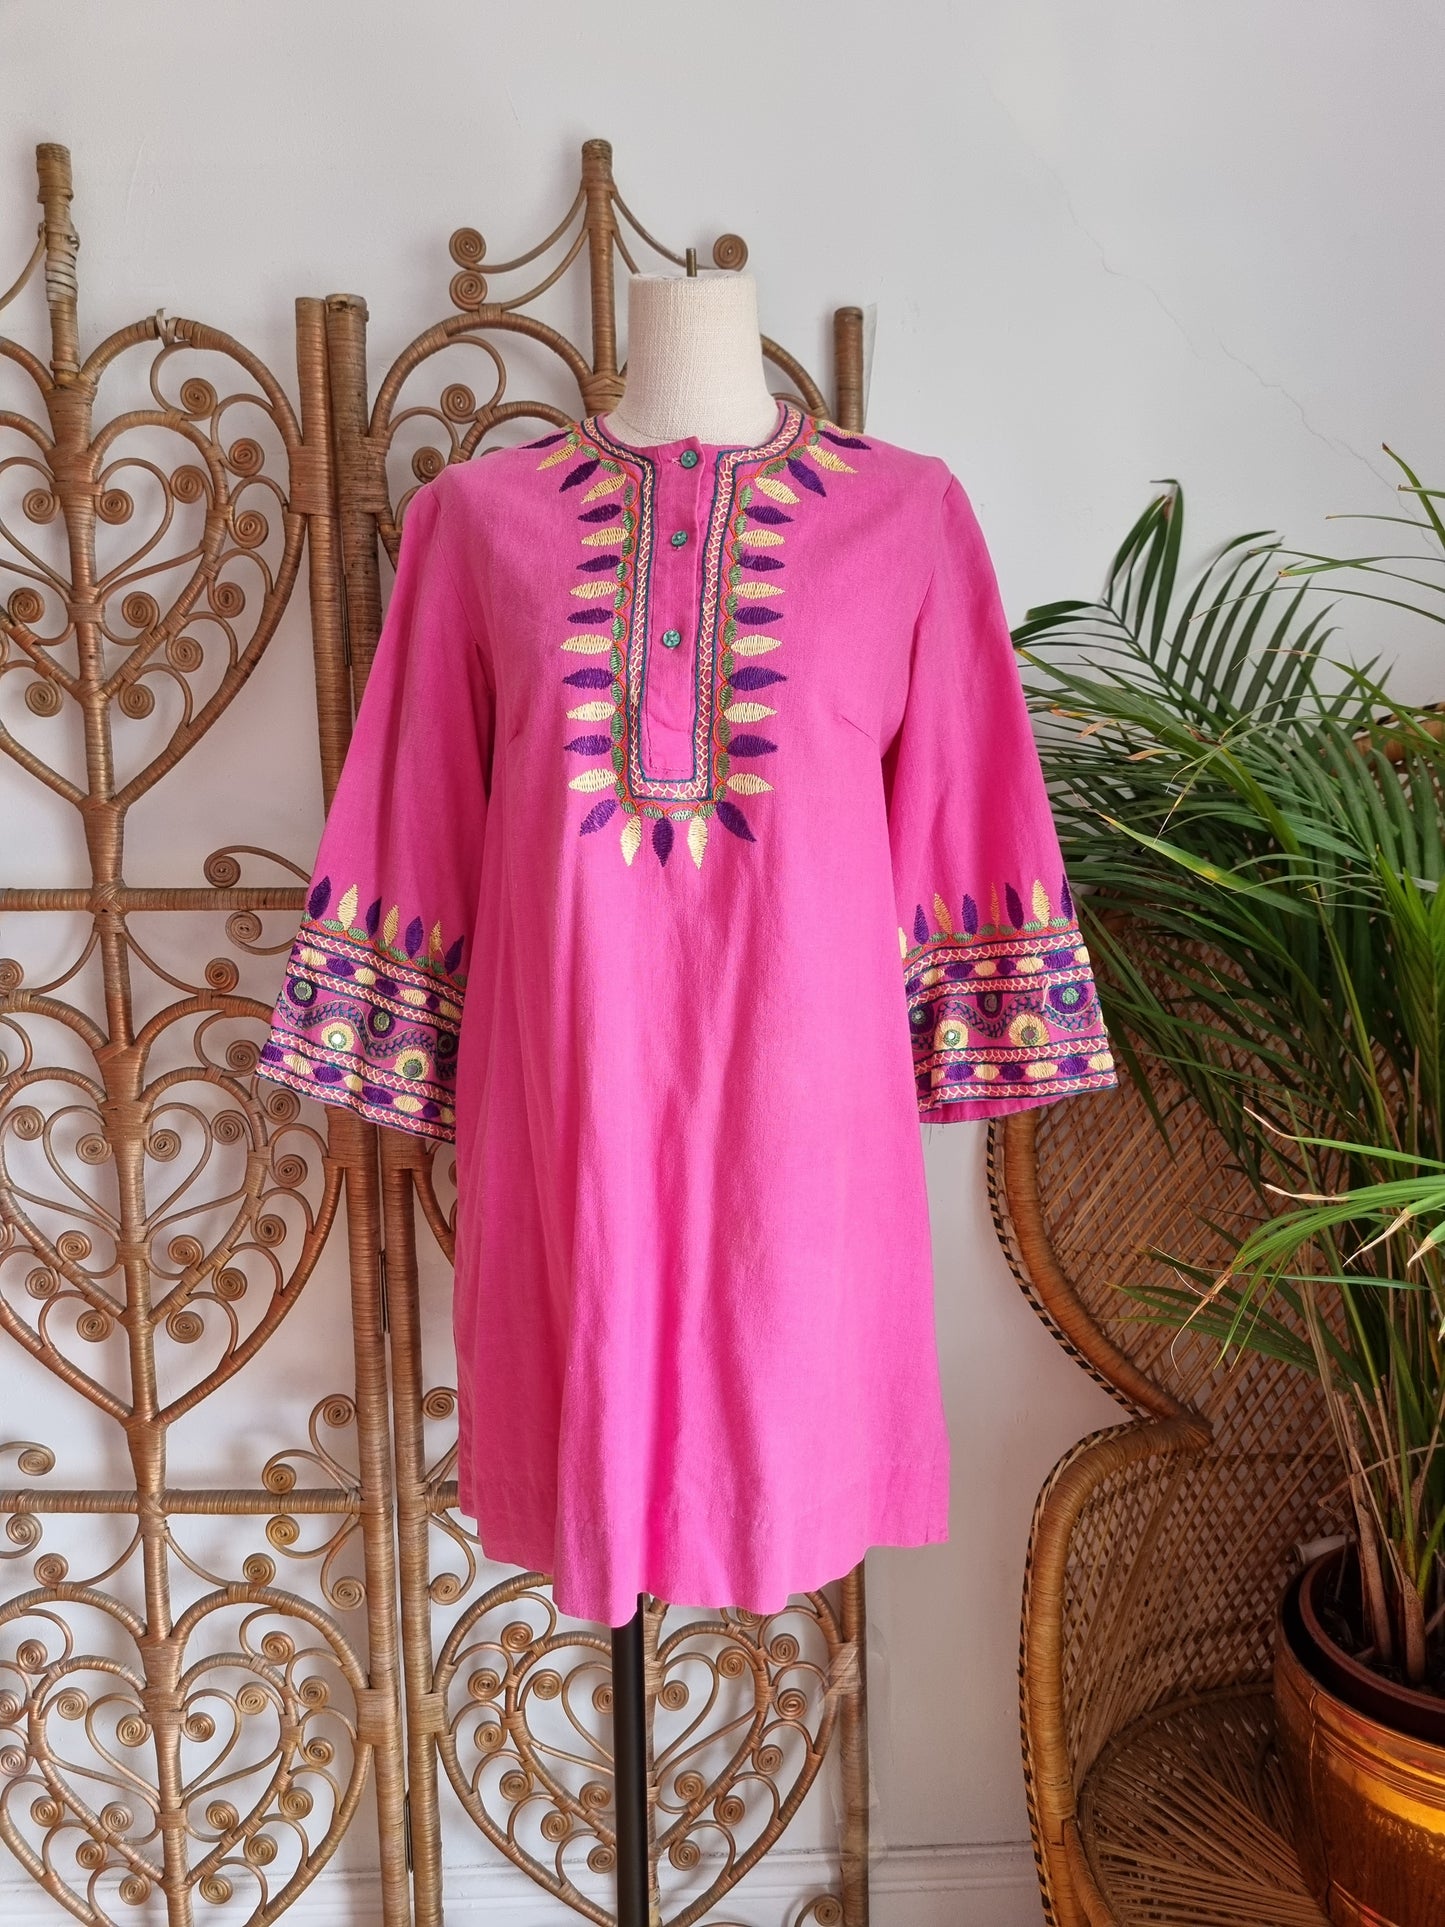 Vintage embroidered Indian tunic dress